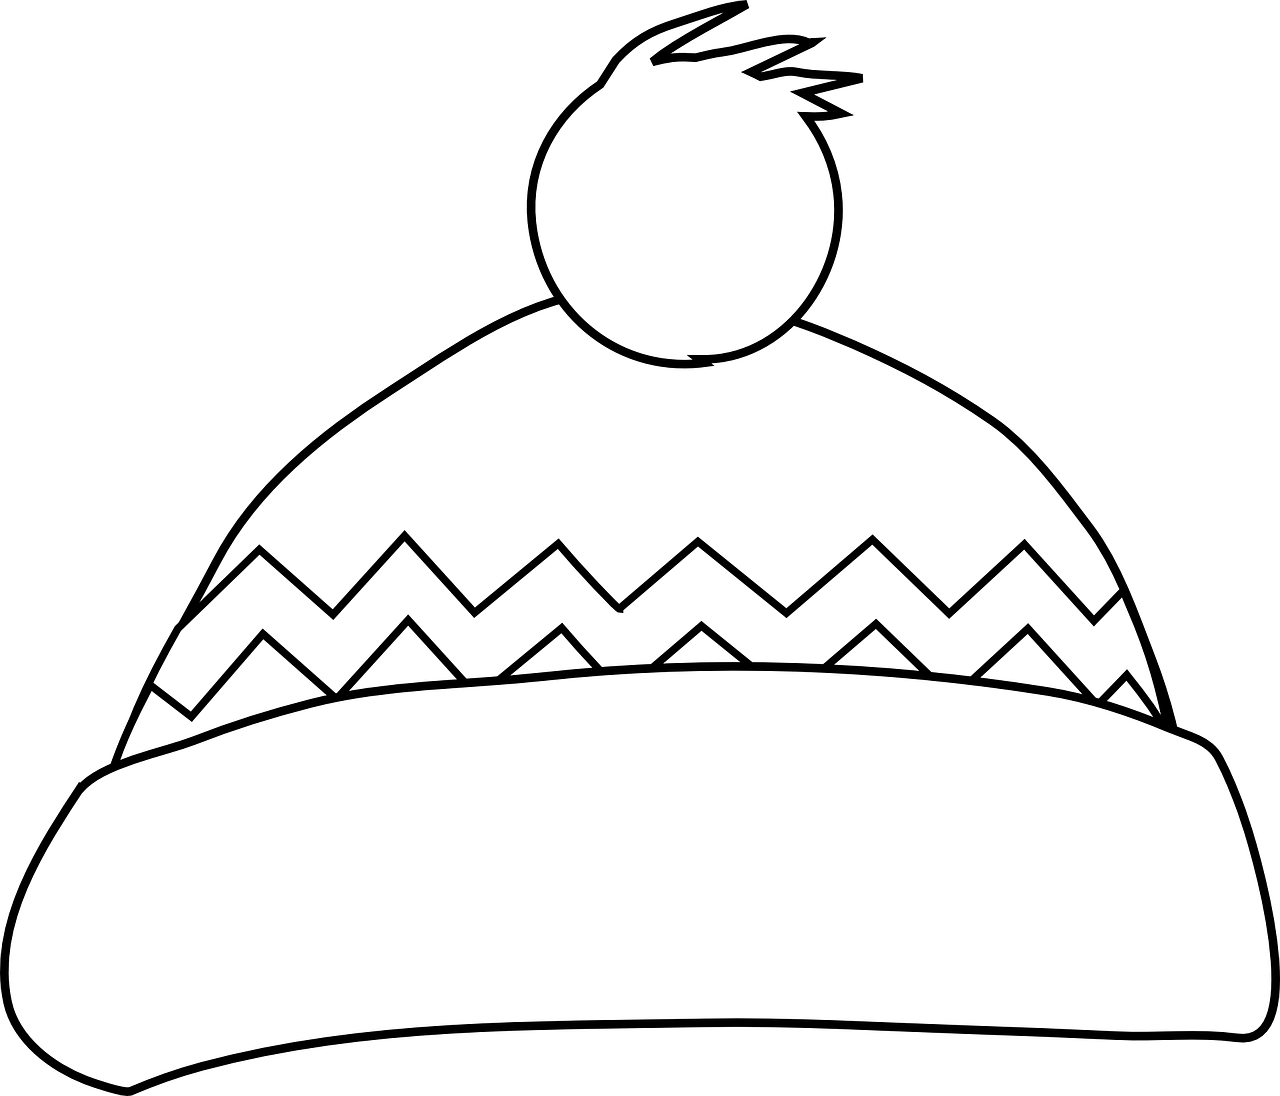 Clipart rocket colouring page. Winter clothing pages in